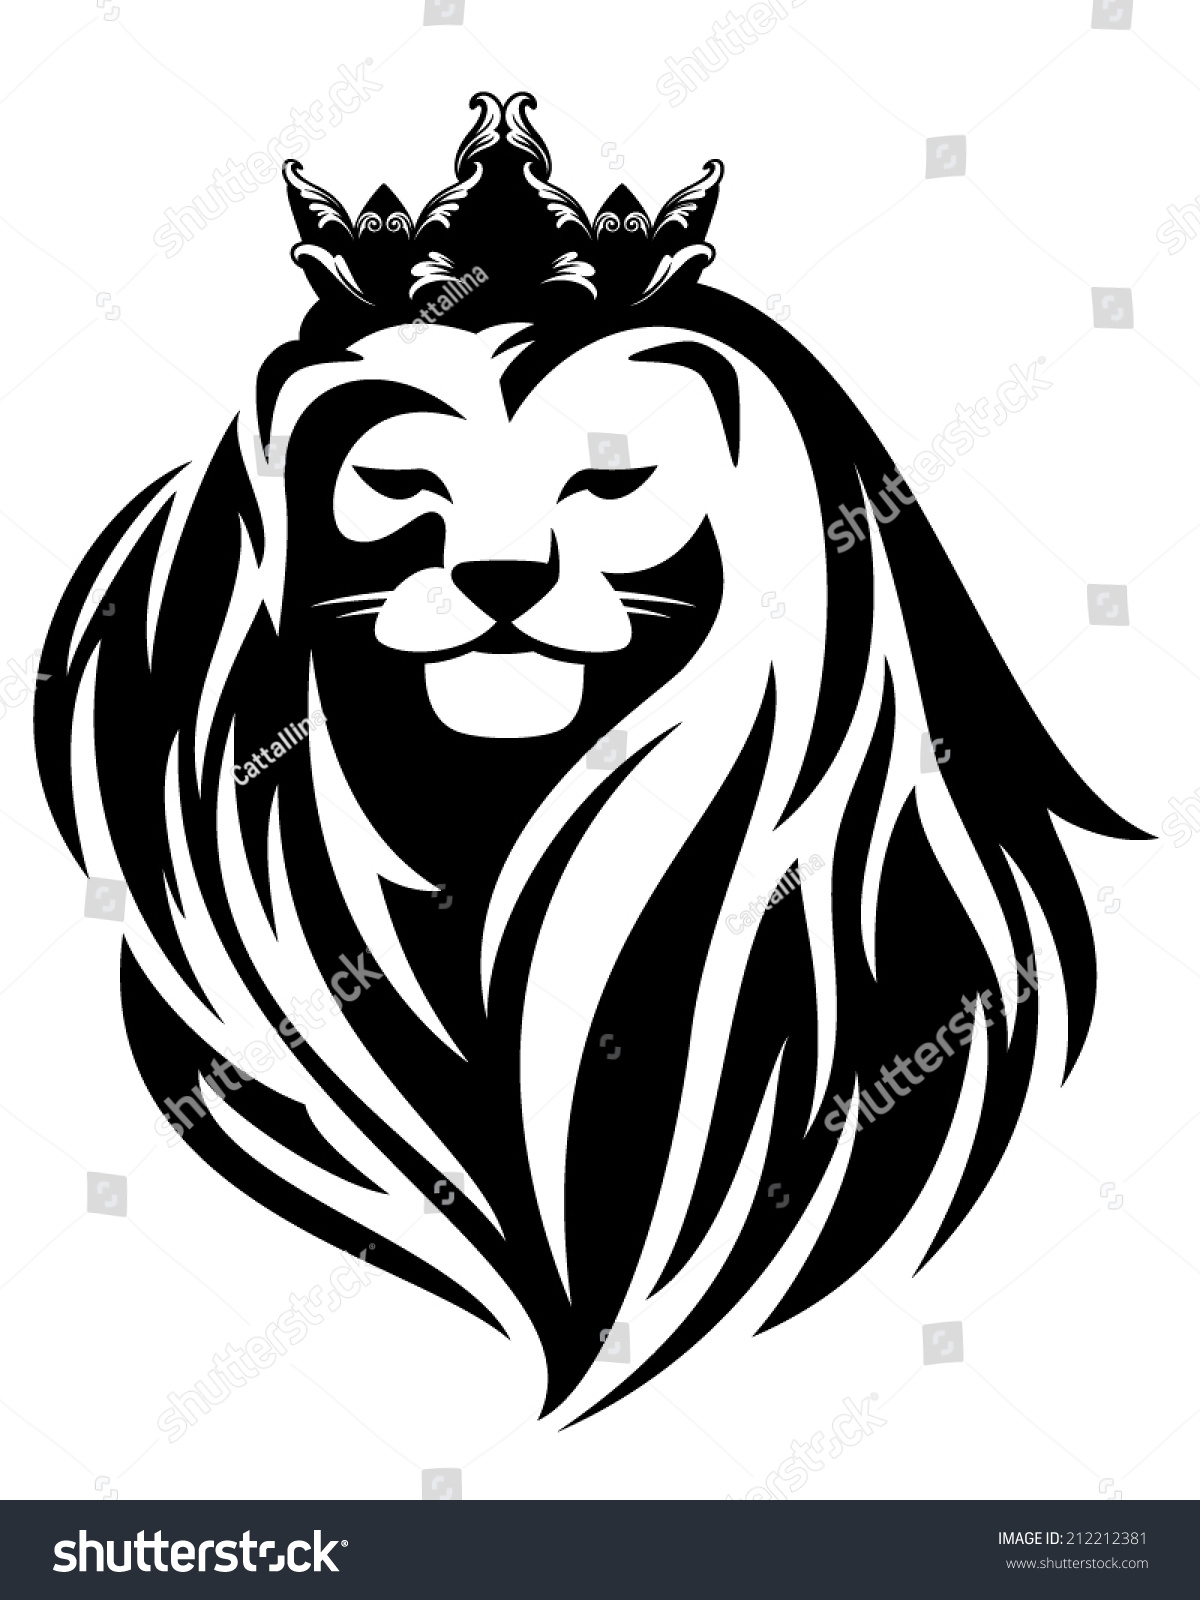 lion with crown clipart - photo #25